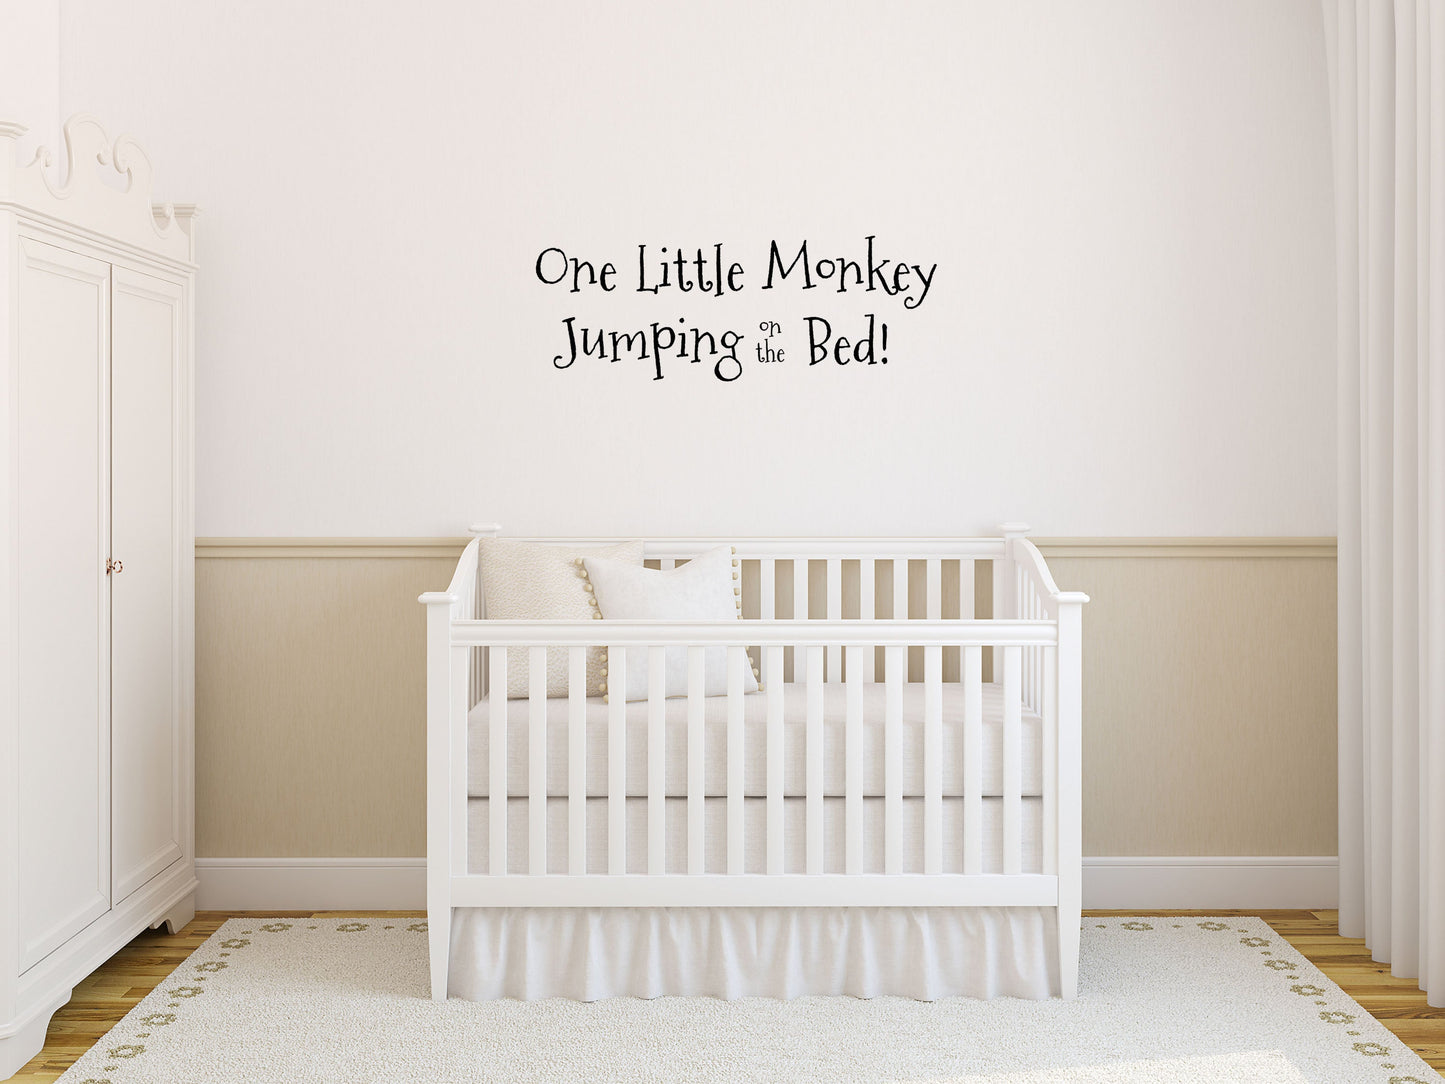 One Little Monkey Jumping On The Bed - Inspirational Wall Decals Vinyl Wall Decal Inspirational Wall Signs 